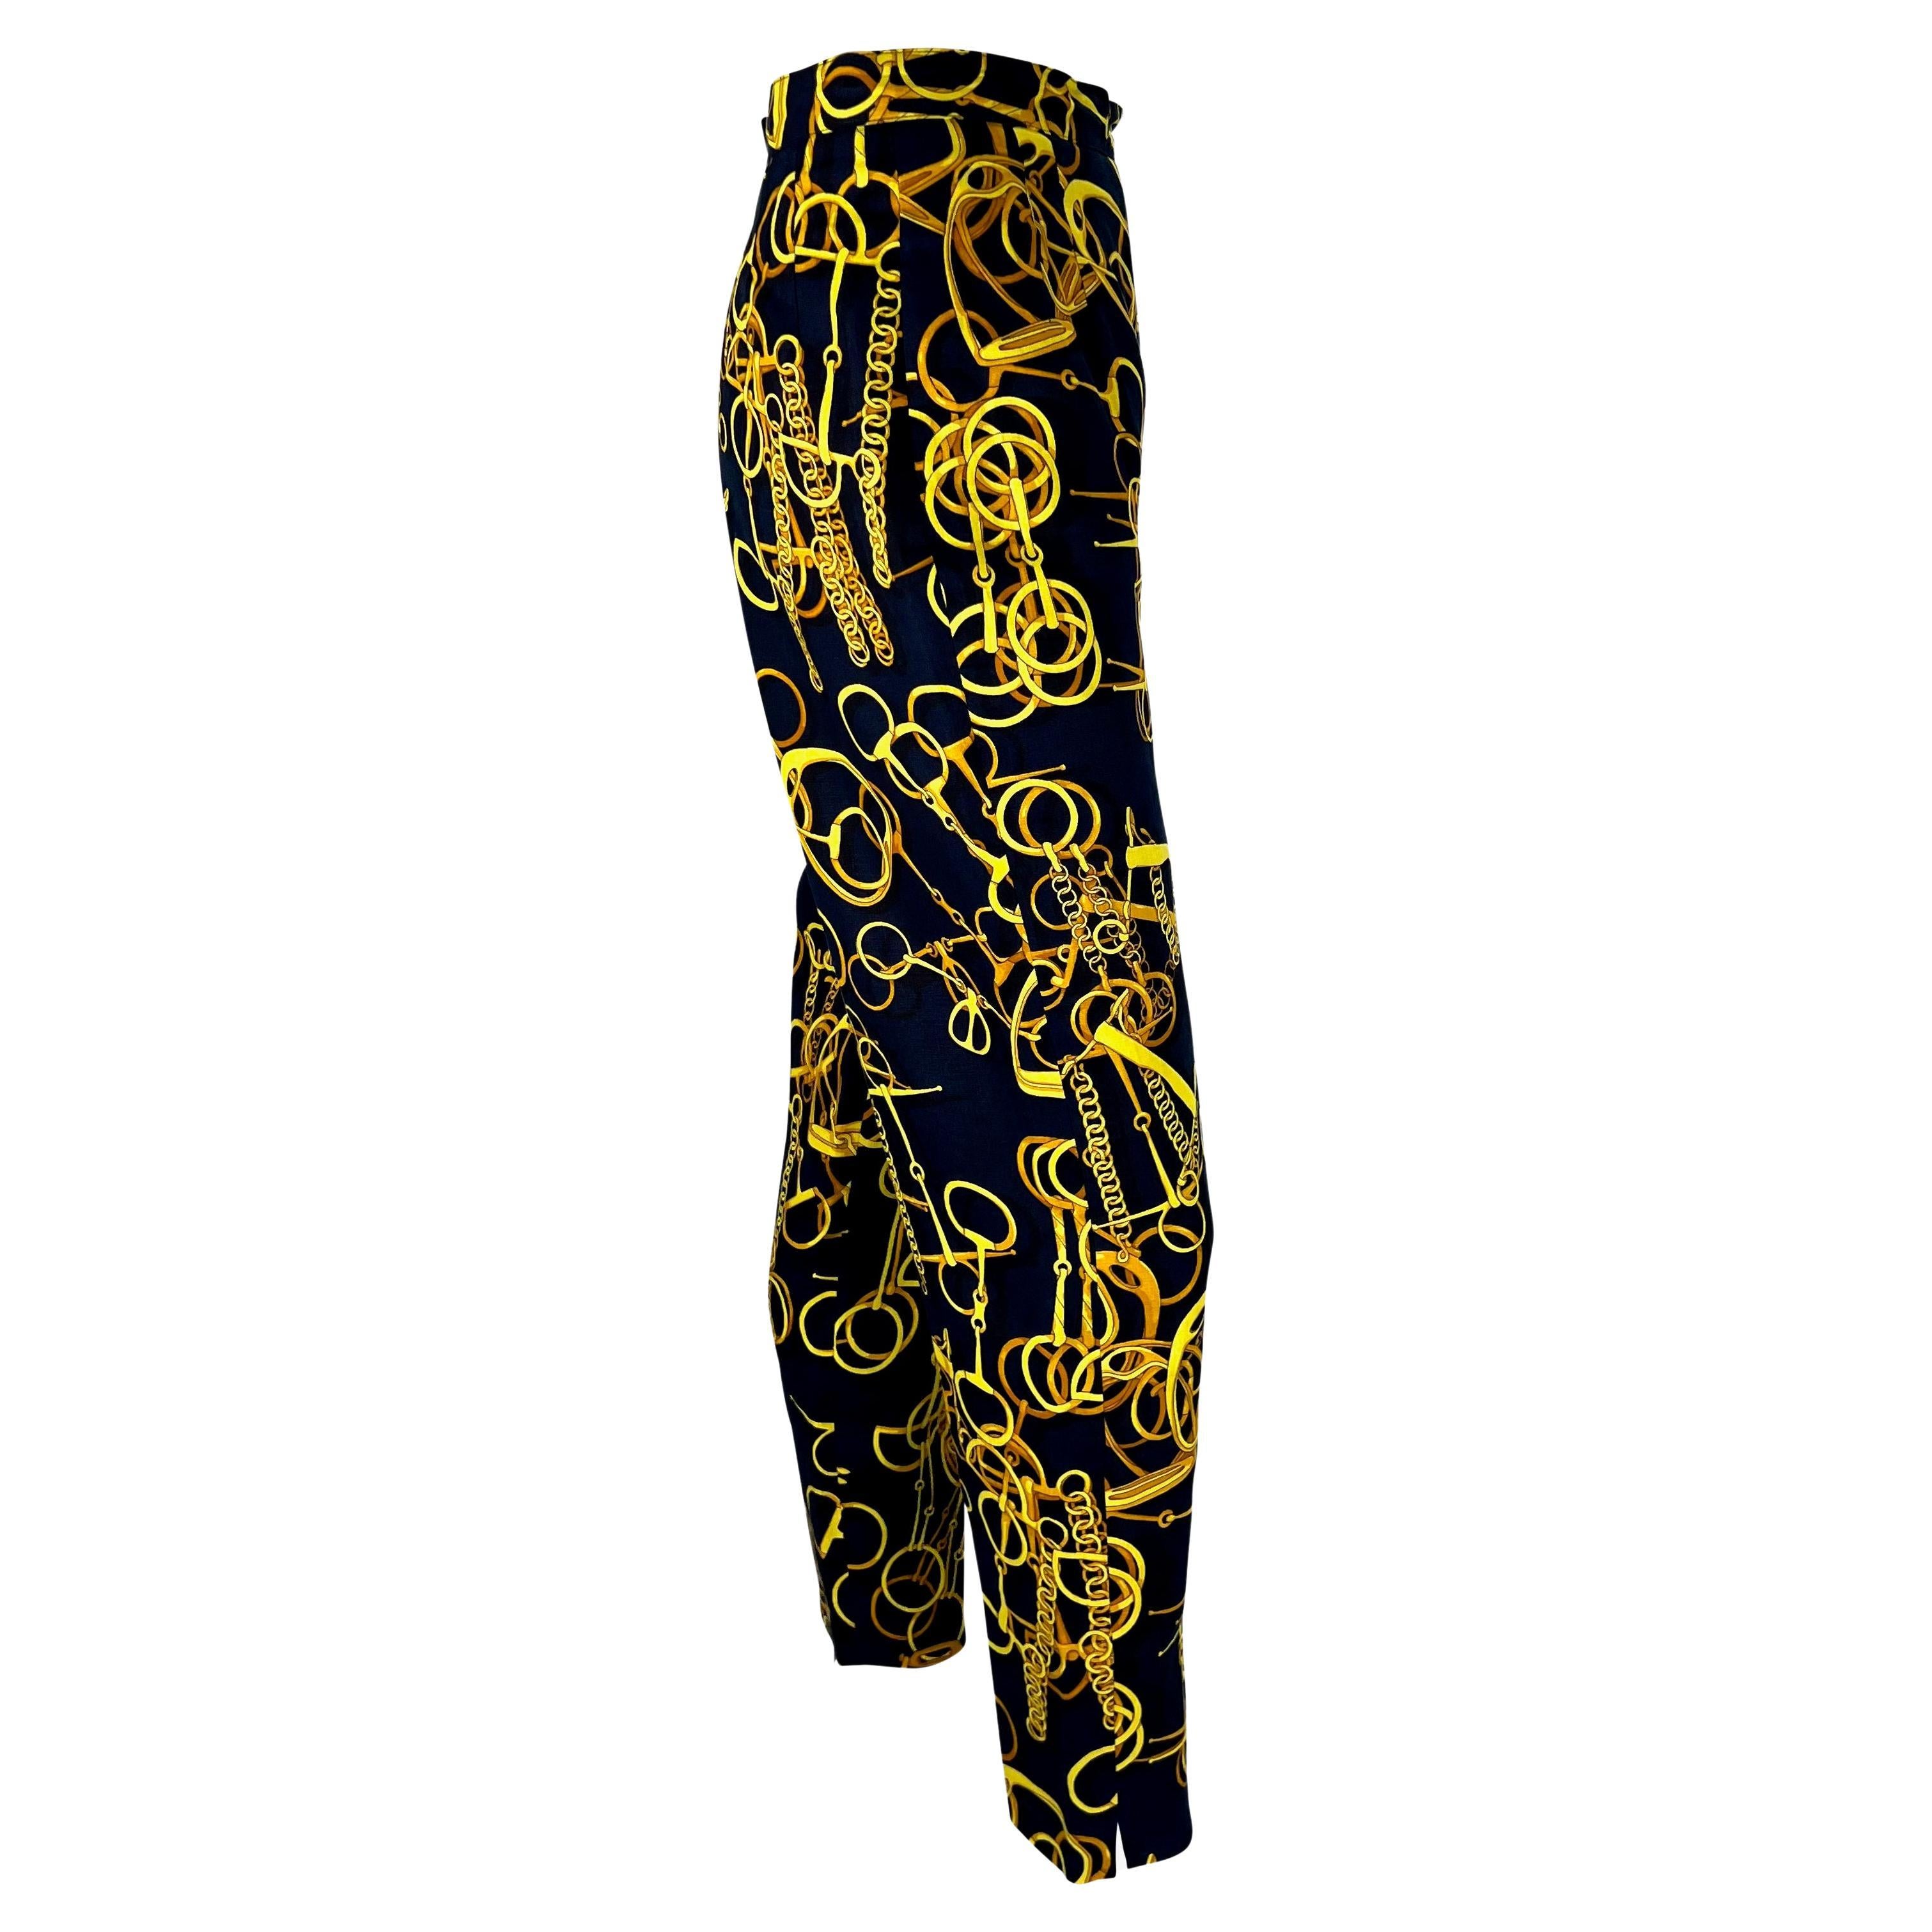 S/S 1993 Gucci Navy Gold Horsebit Print Silk French Cuff Blouse Linen Pants For Sale 5